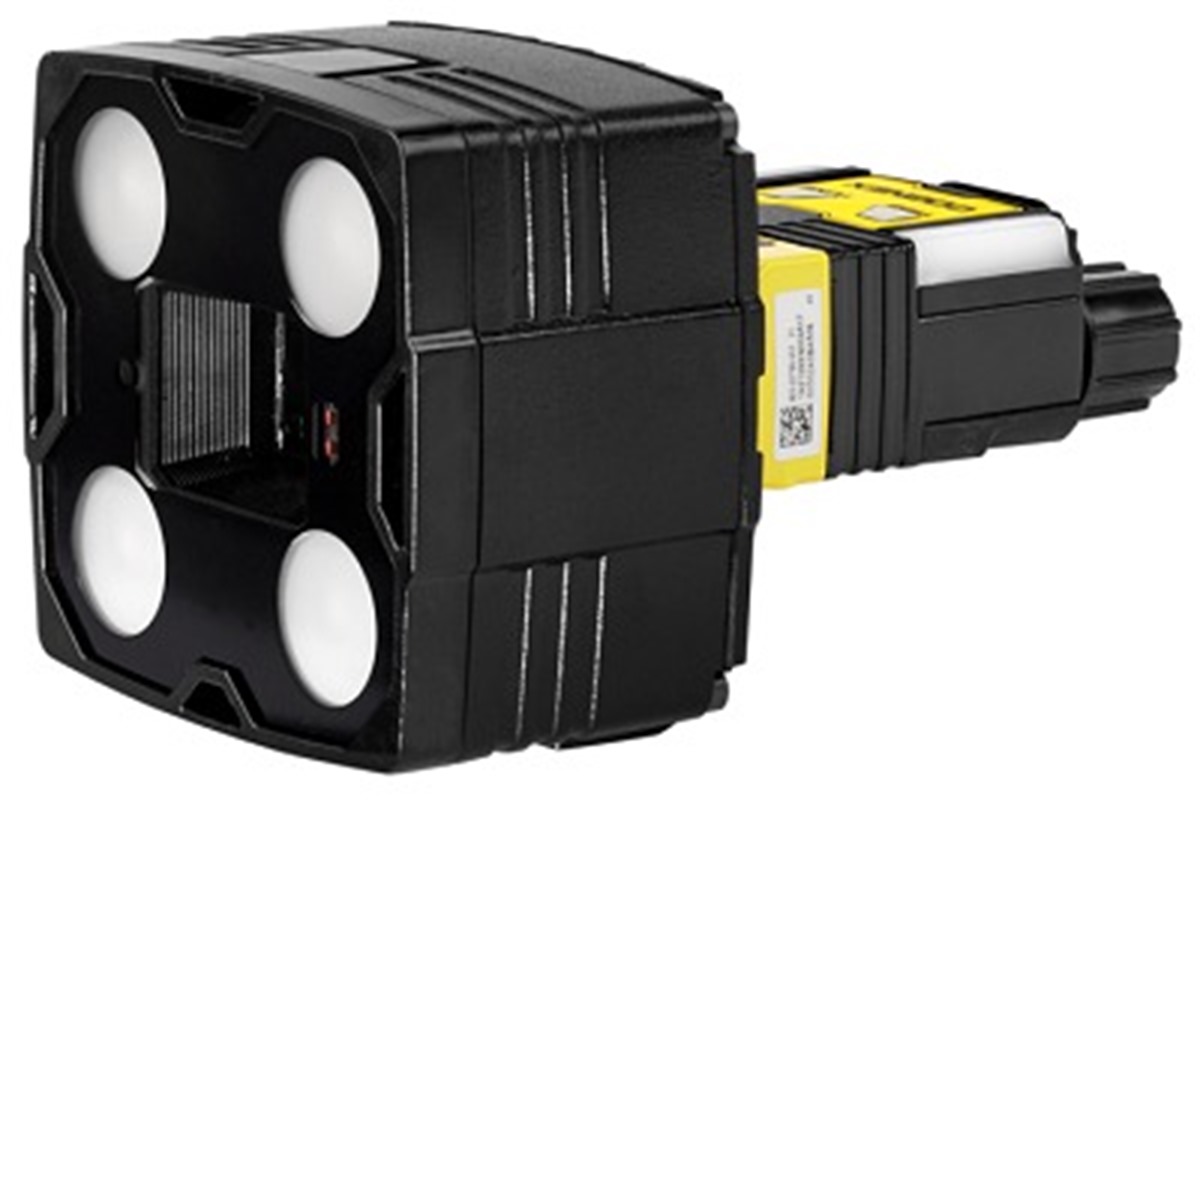 In- Sight  D S2800  Series from  Cognex.png  Thumbnail0